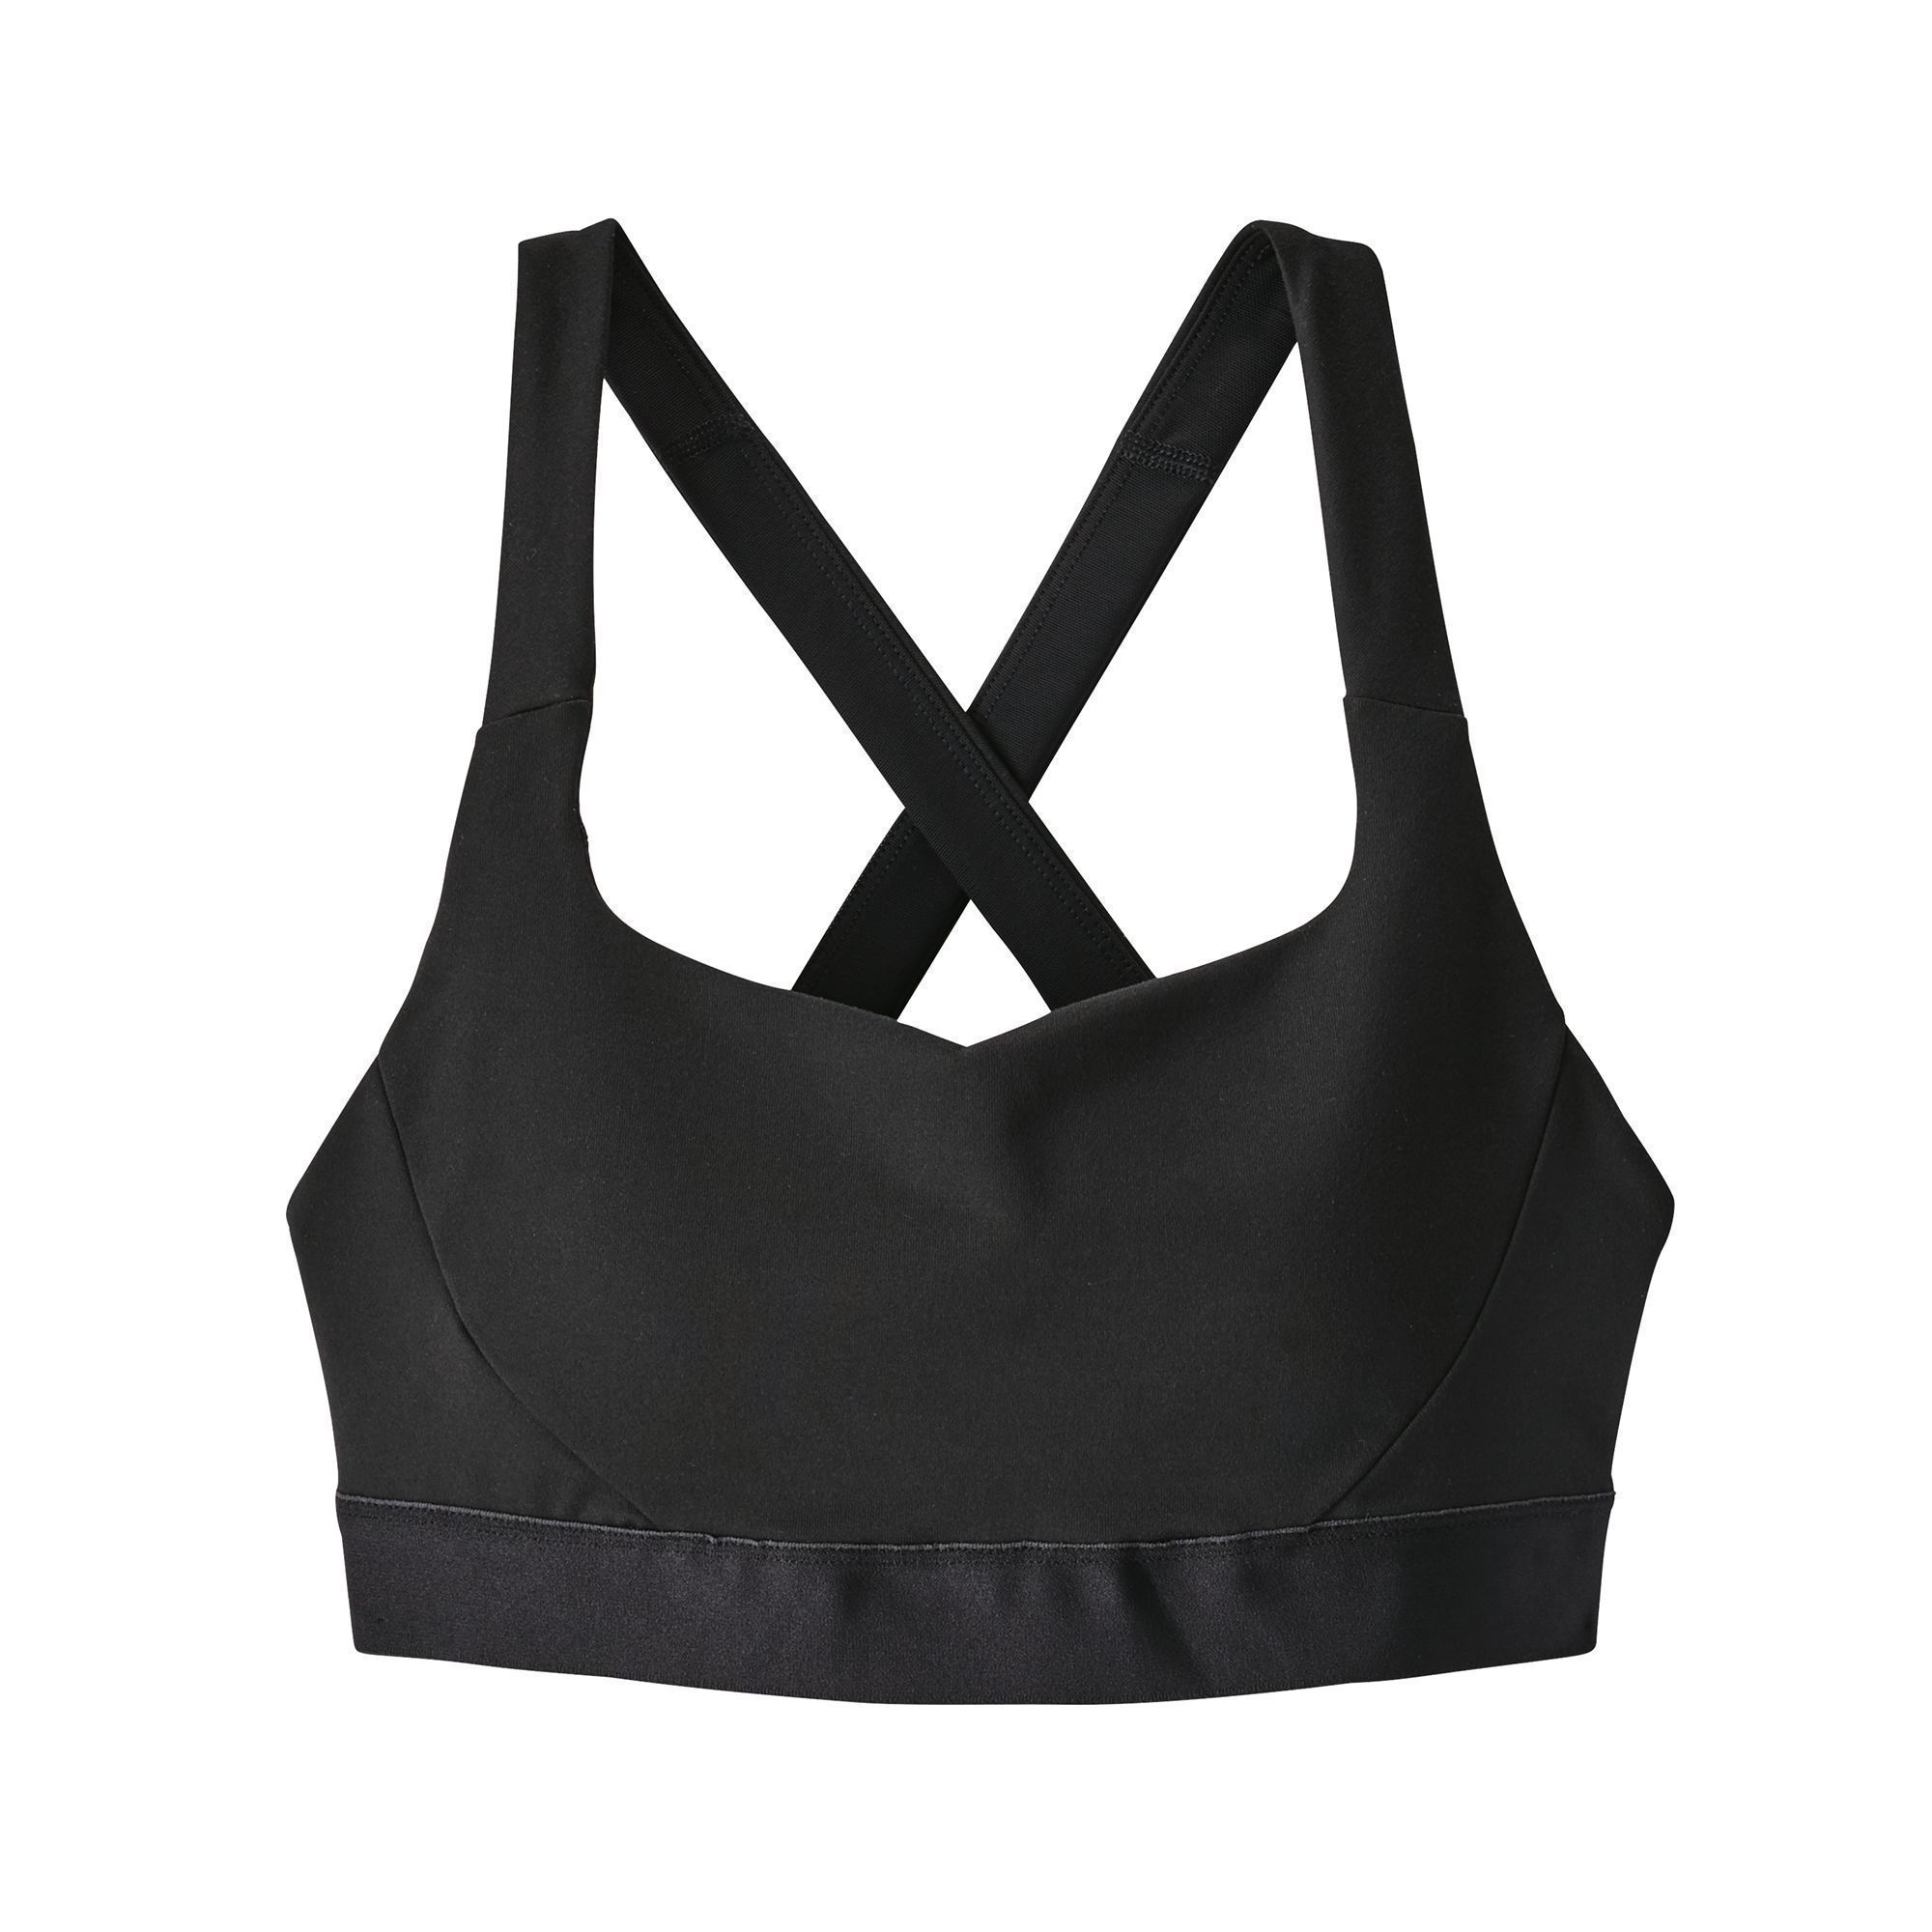 Patagonia Women's Switchback Sports Bra - Recycled Polyester, Black / S